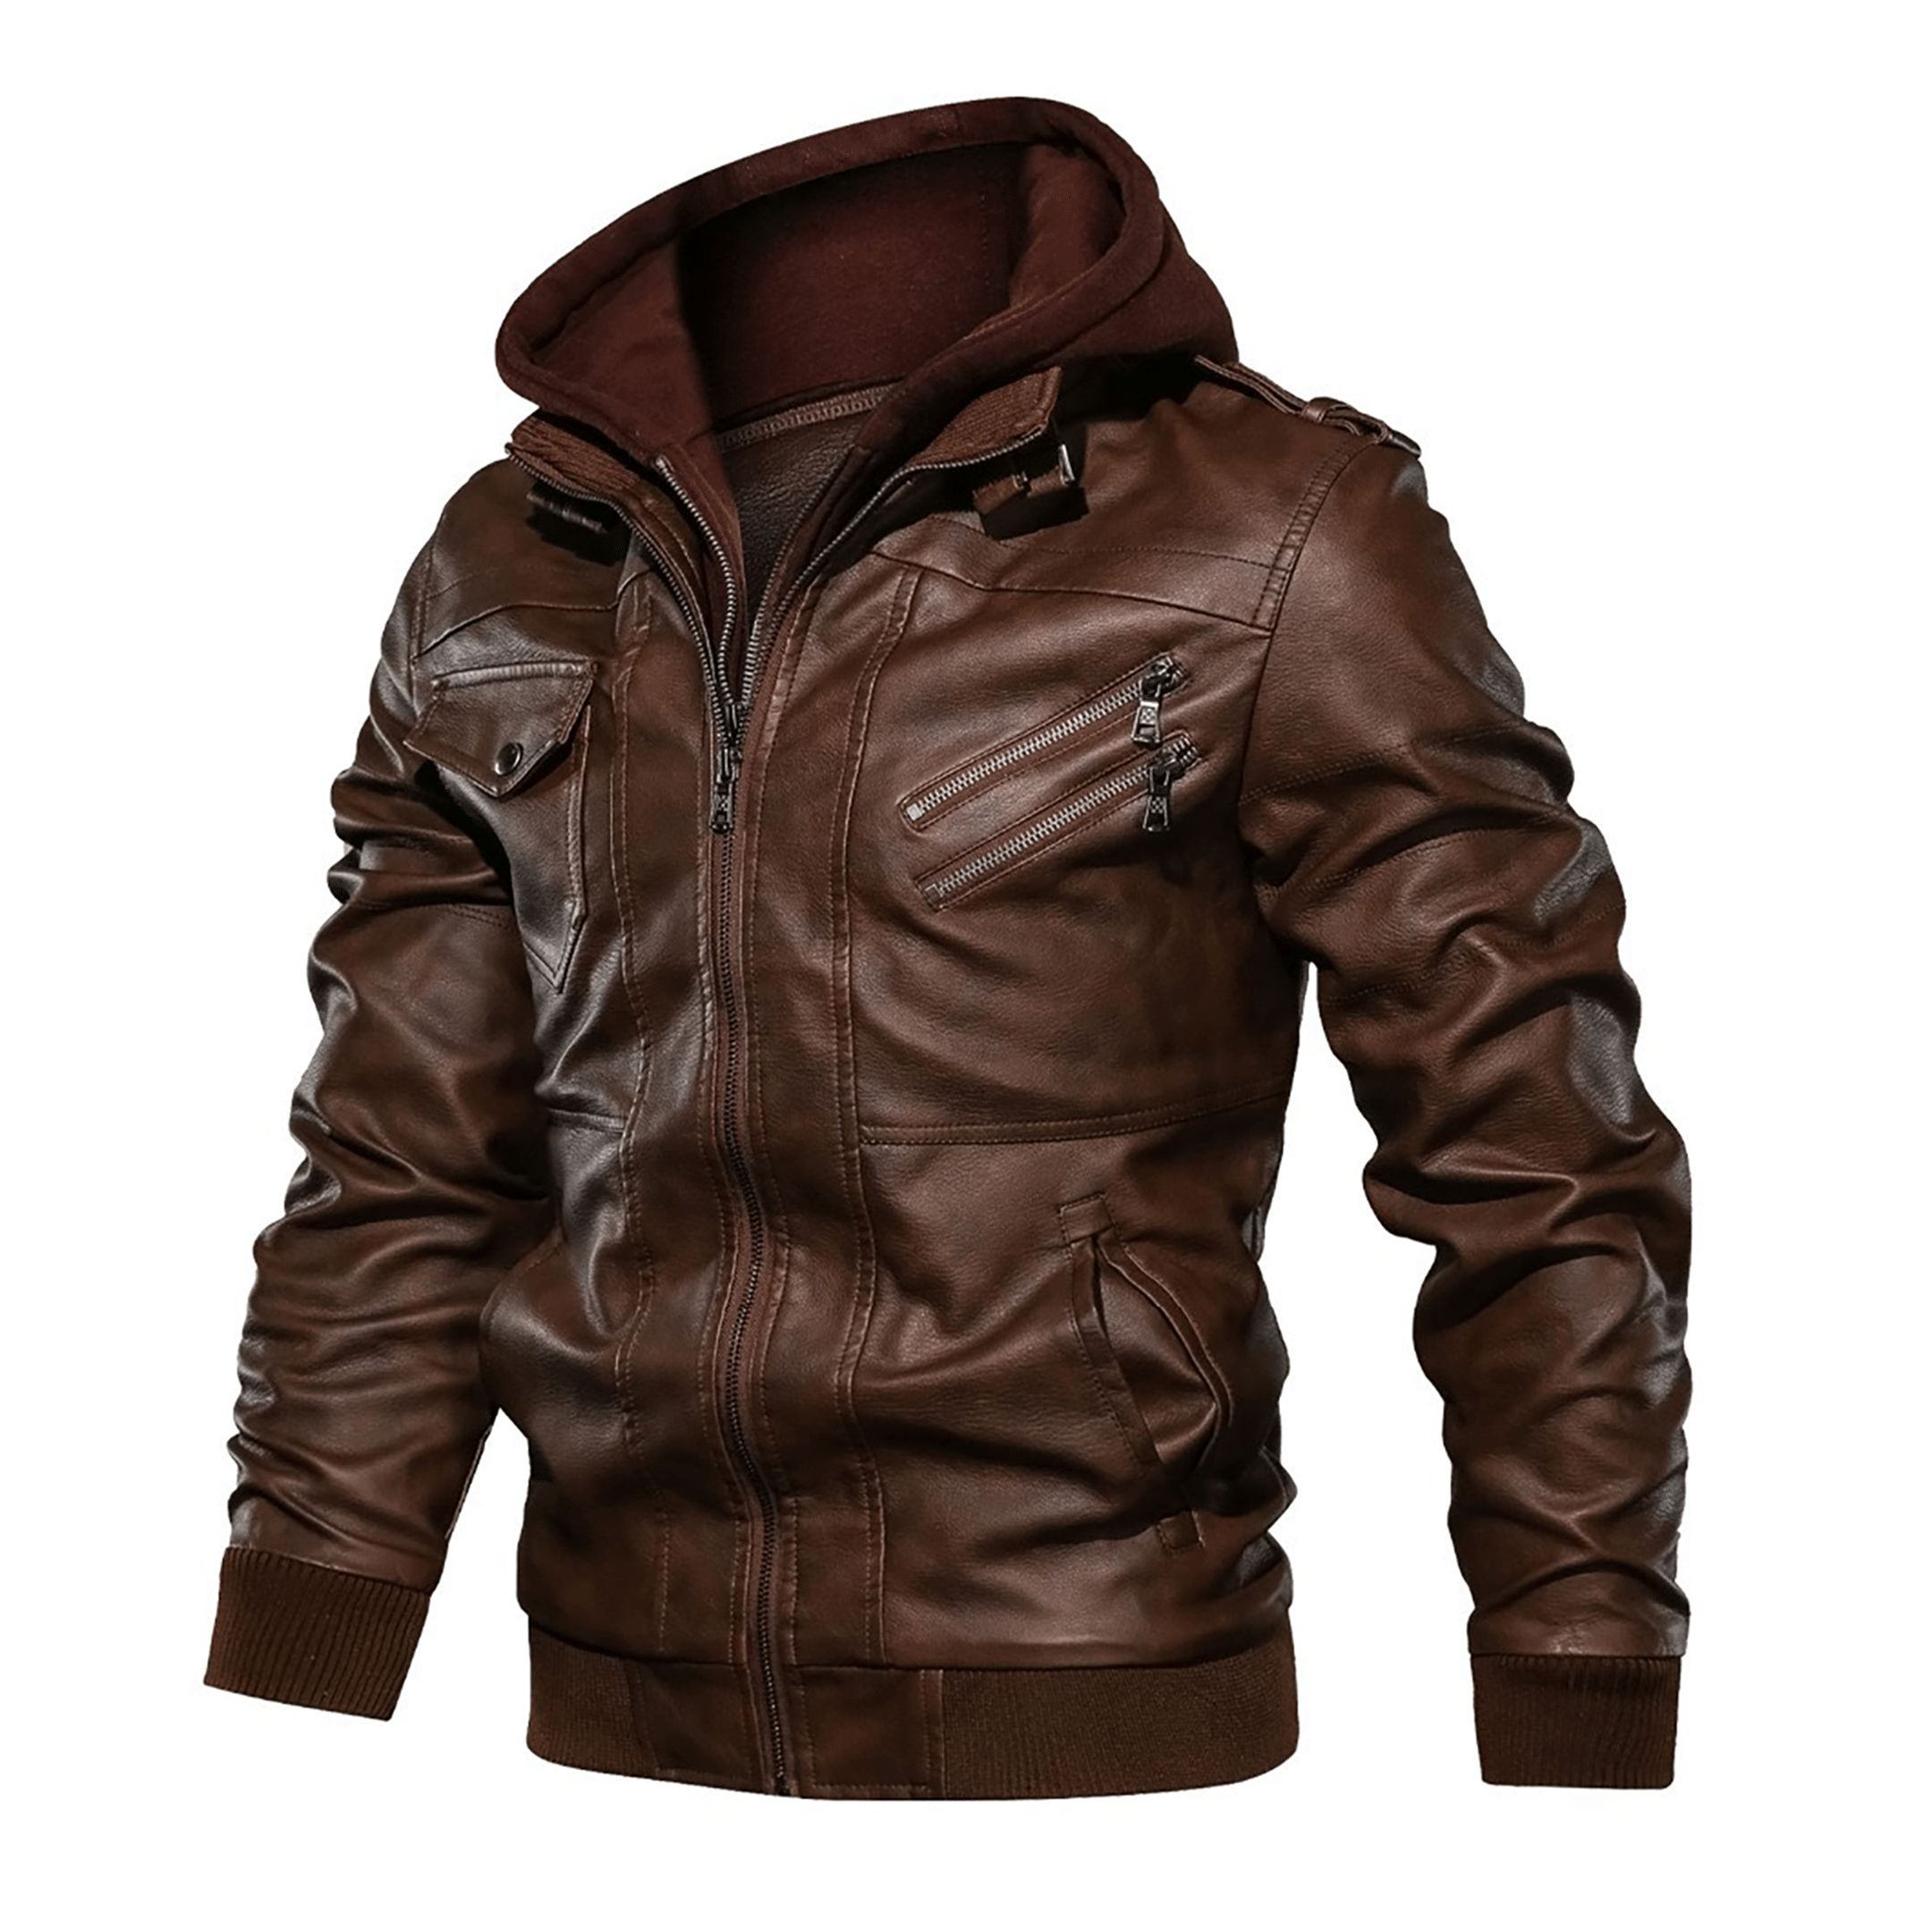 Top leather jackets and latest products 485